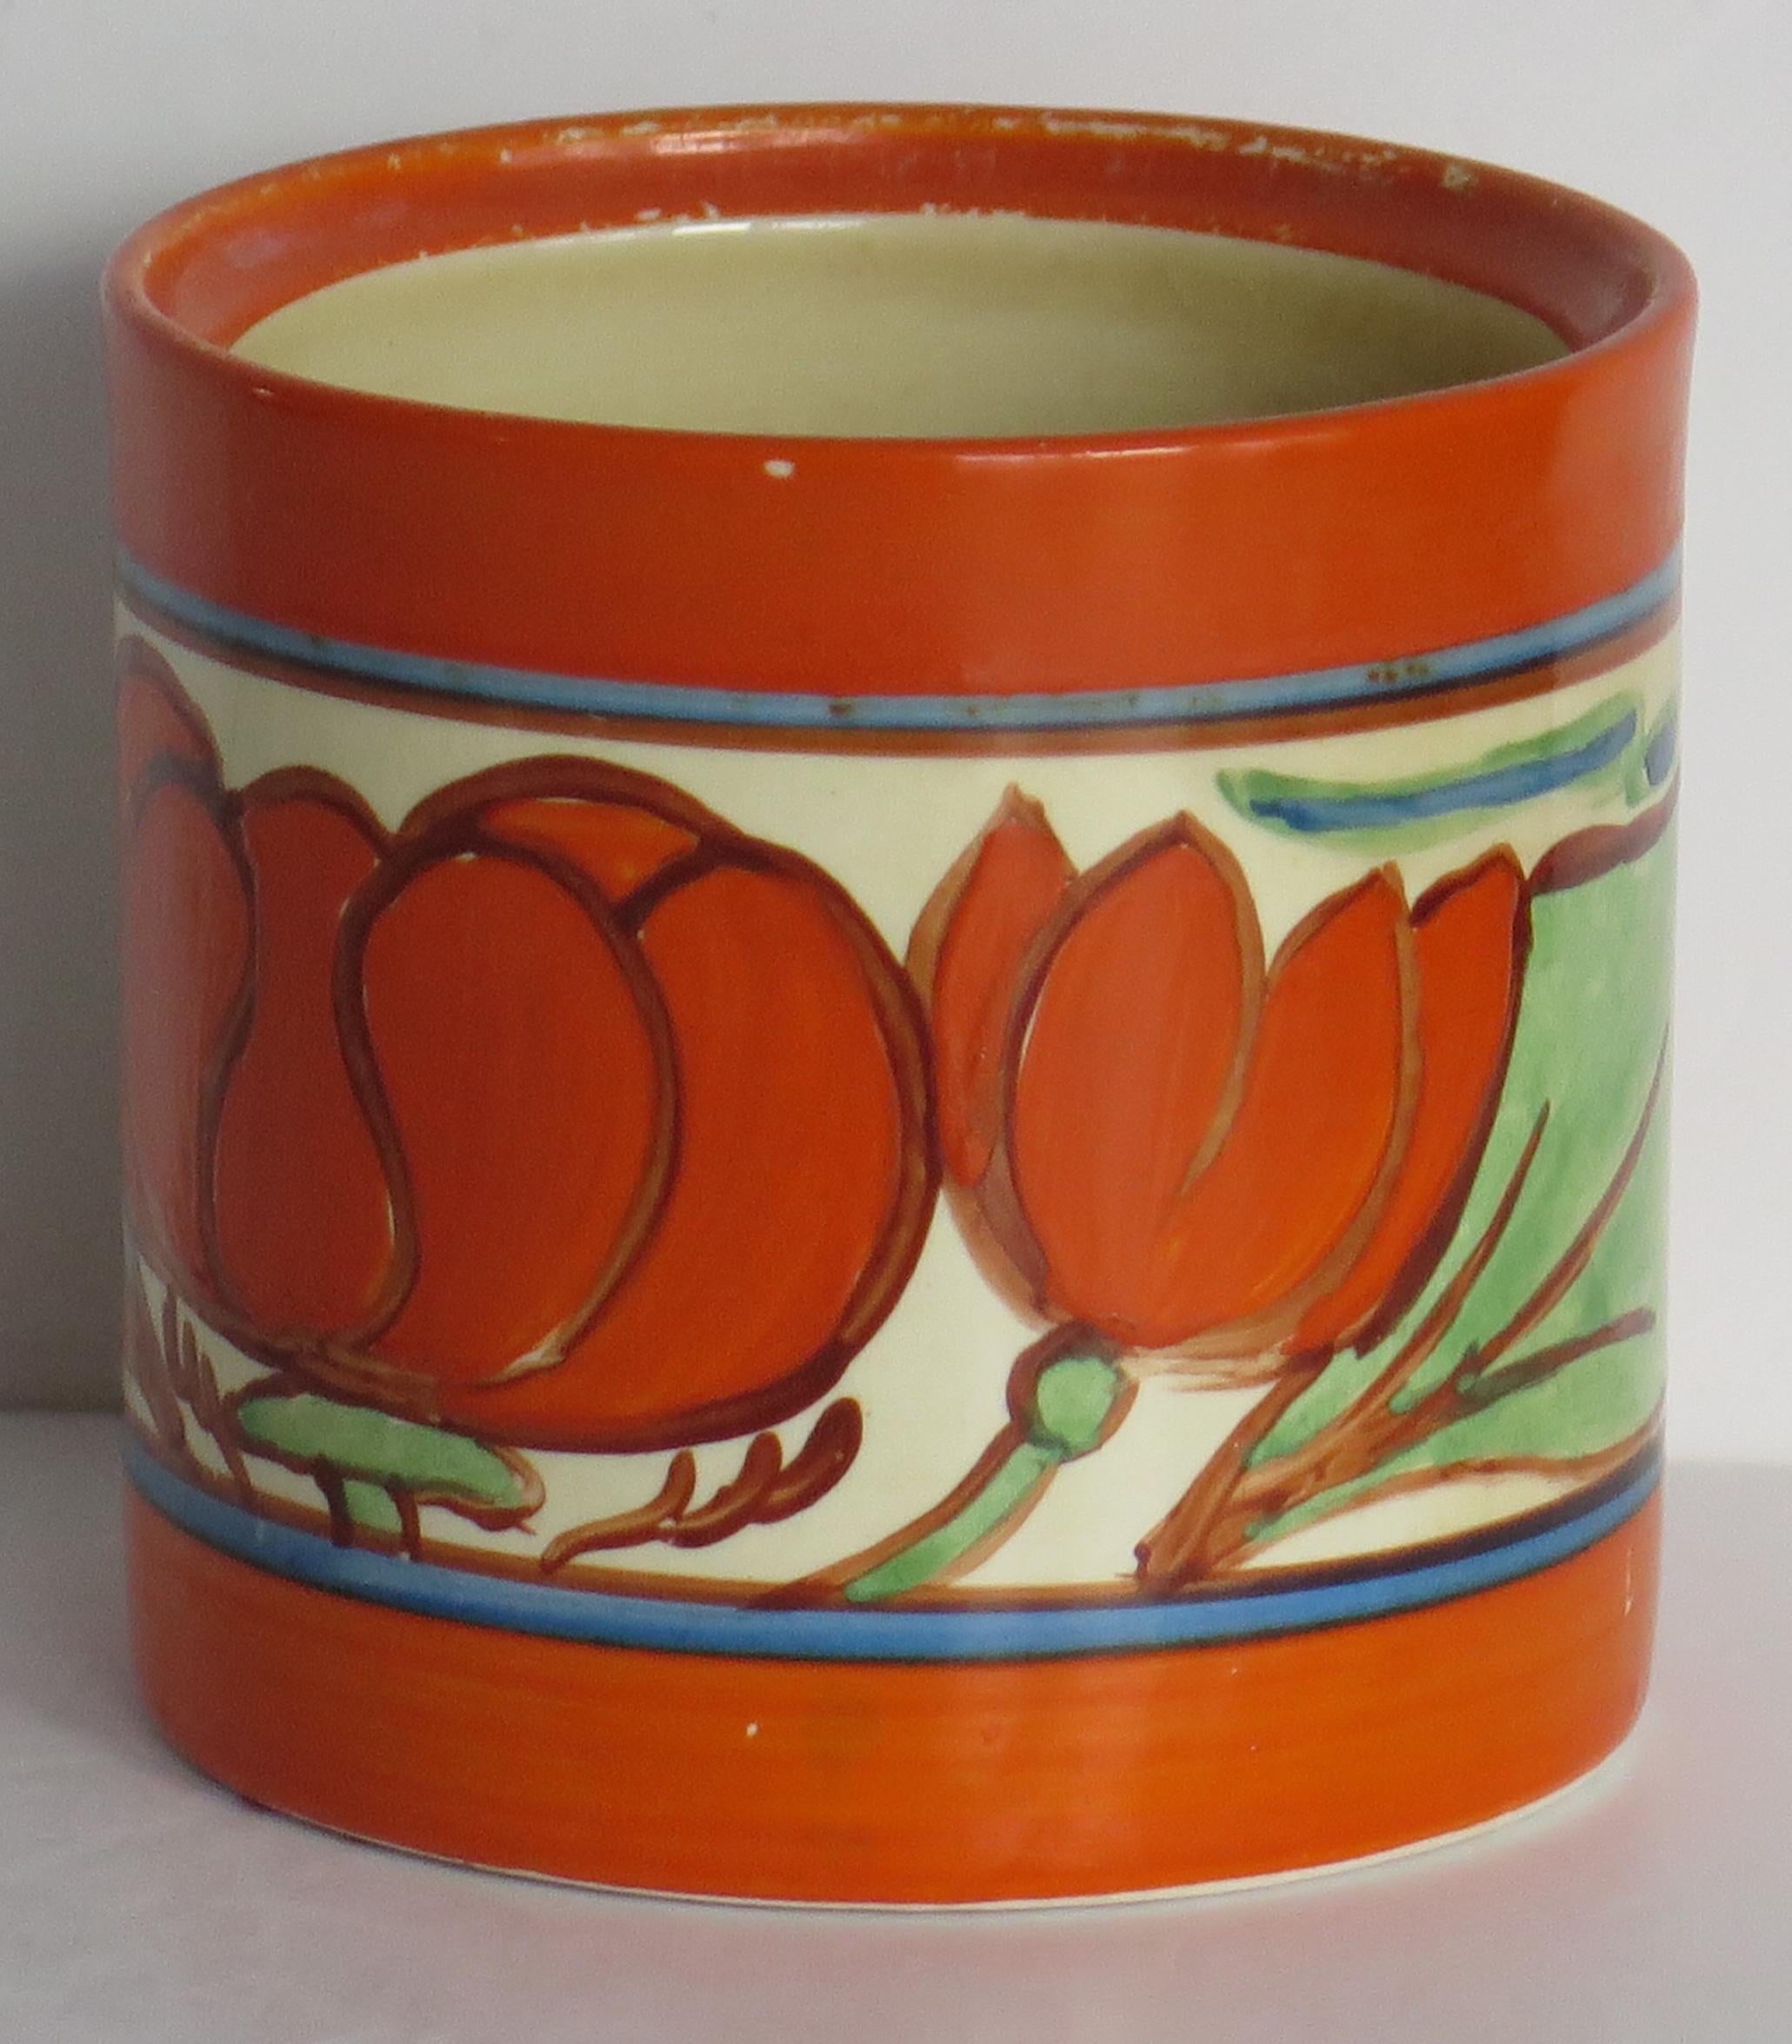 This is a circular pot in the rare, hand painted 